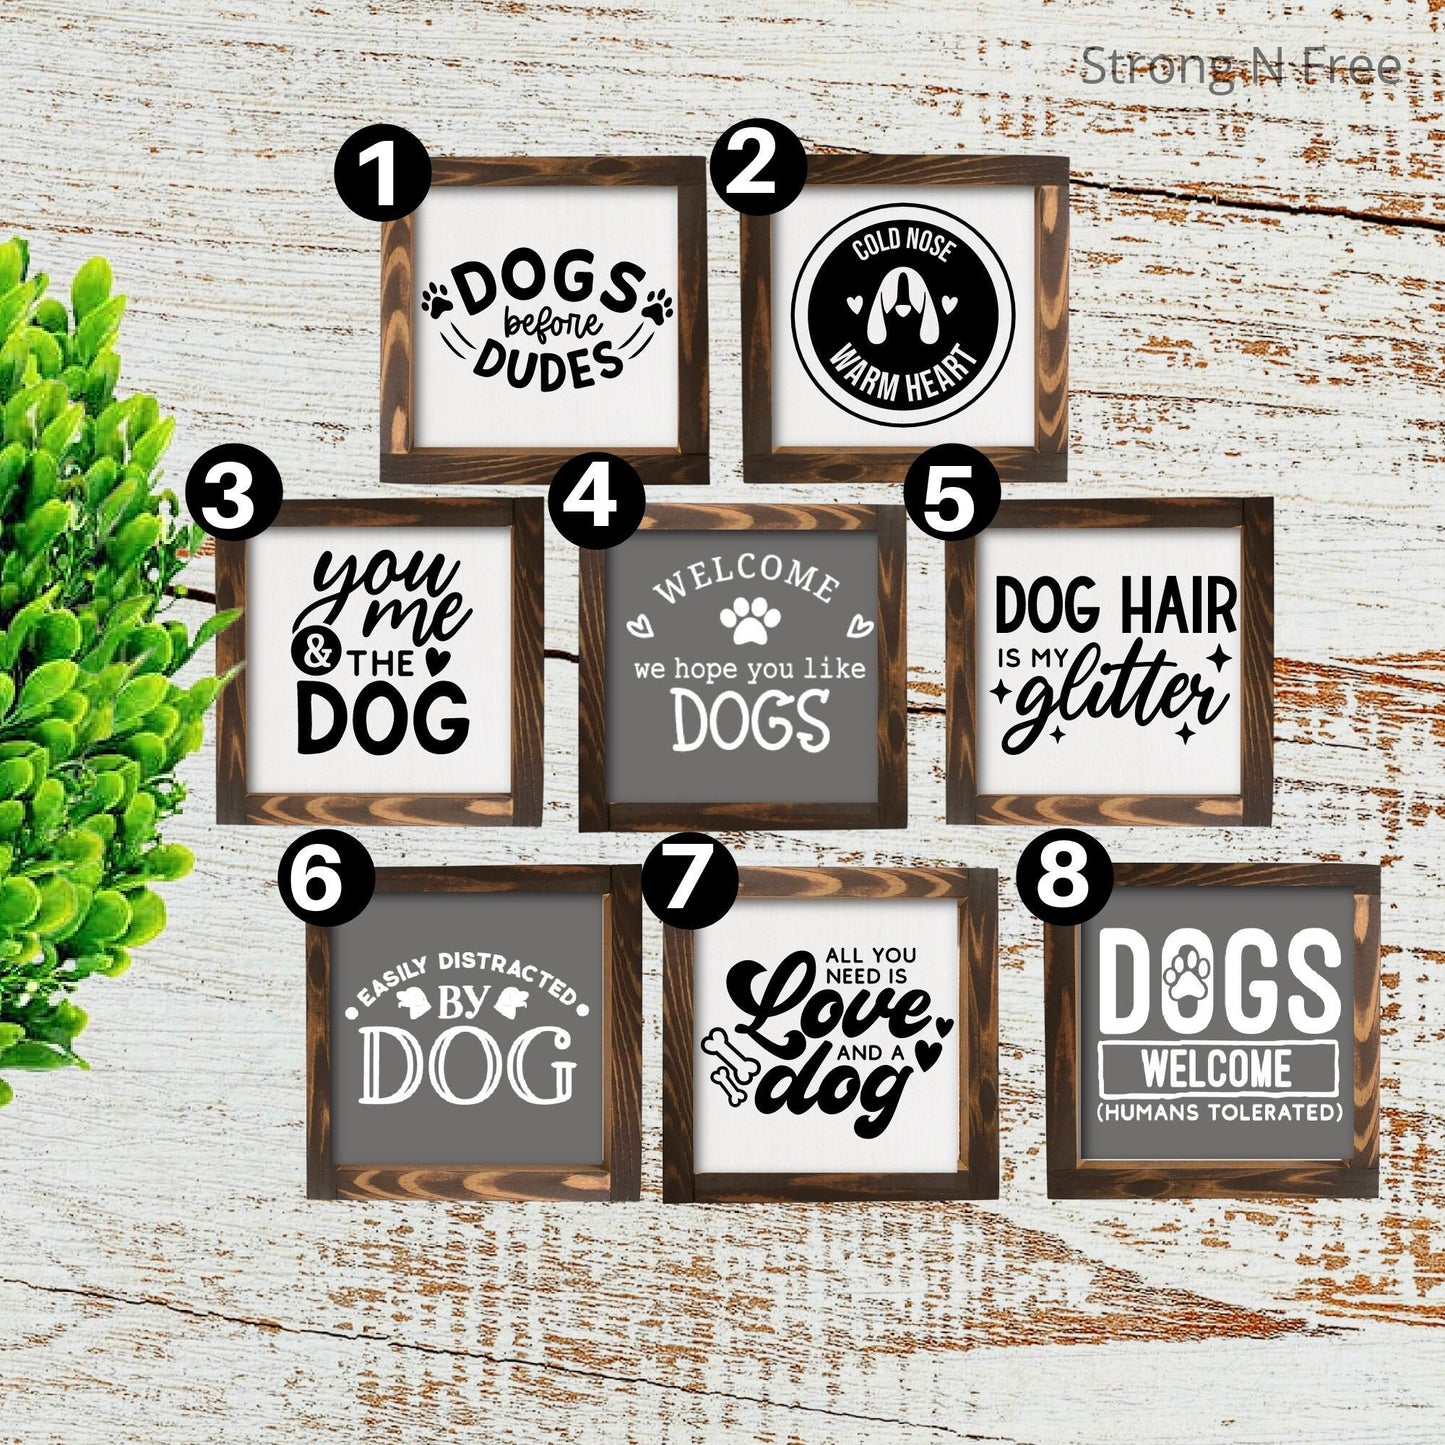 Dog Cat Home Mini 6x6" Farmhouse Style Signs for Tiered Tray. Tiered Tray Decor, Coffee Bar Sign, Framed Mini Sign, Home Mini Sign, Dog Sign